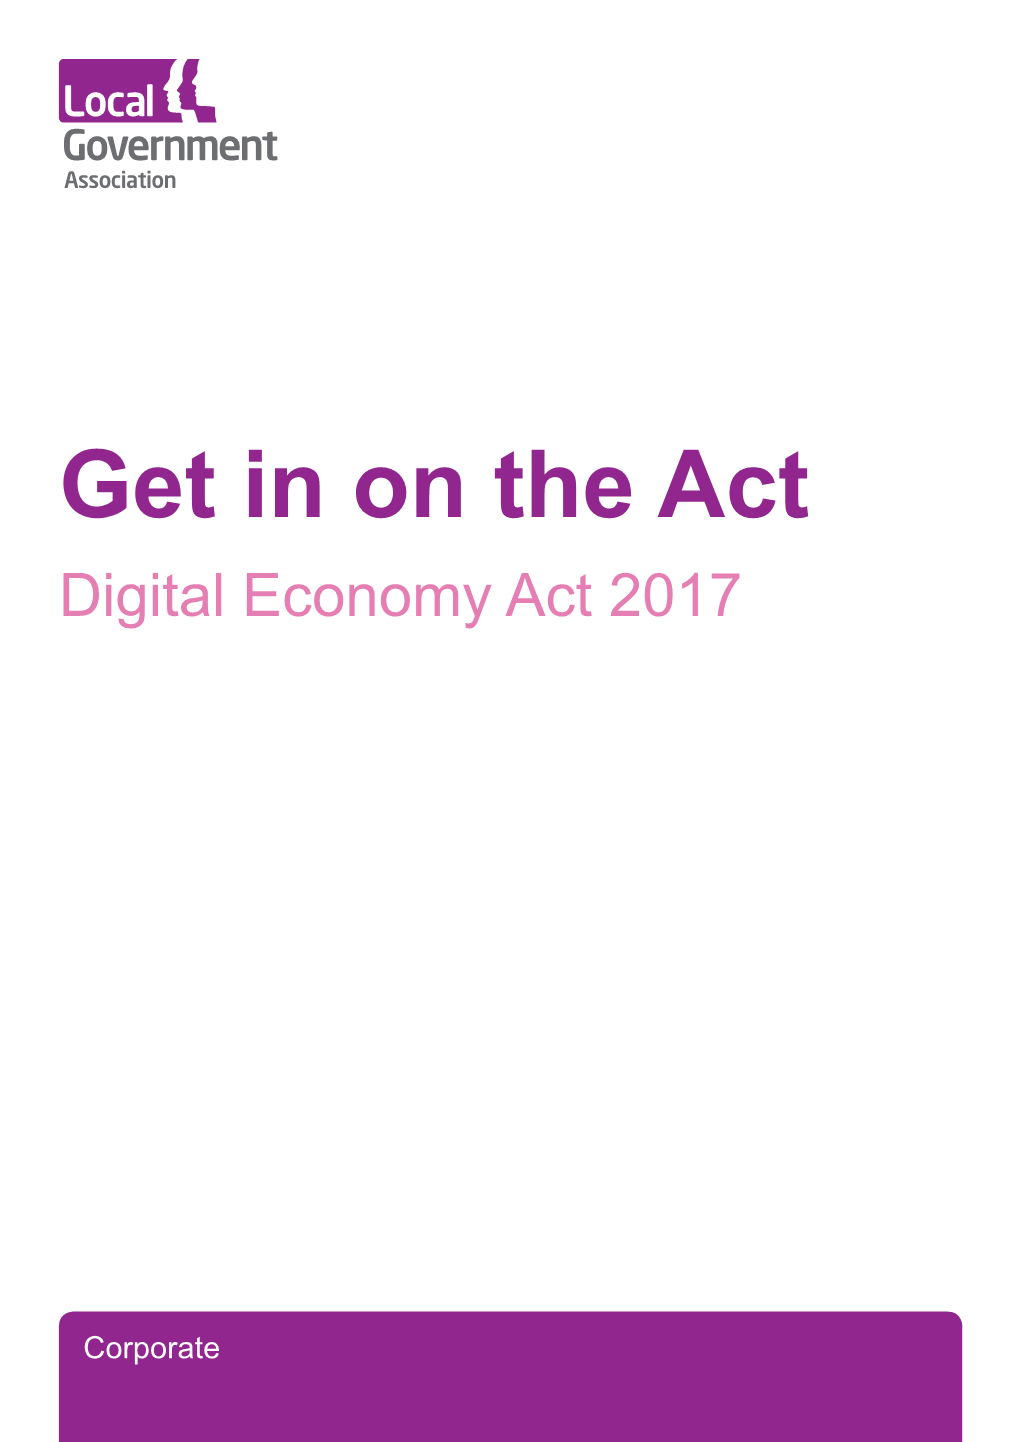 Digital Economy Act 2017 (Get in on the Act)